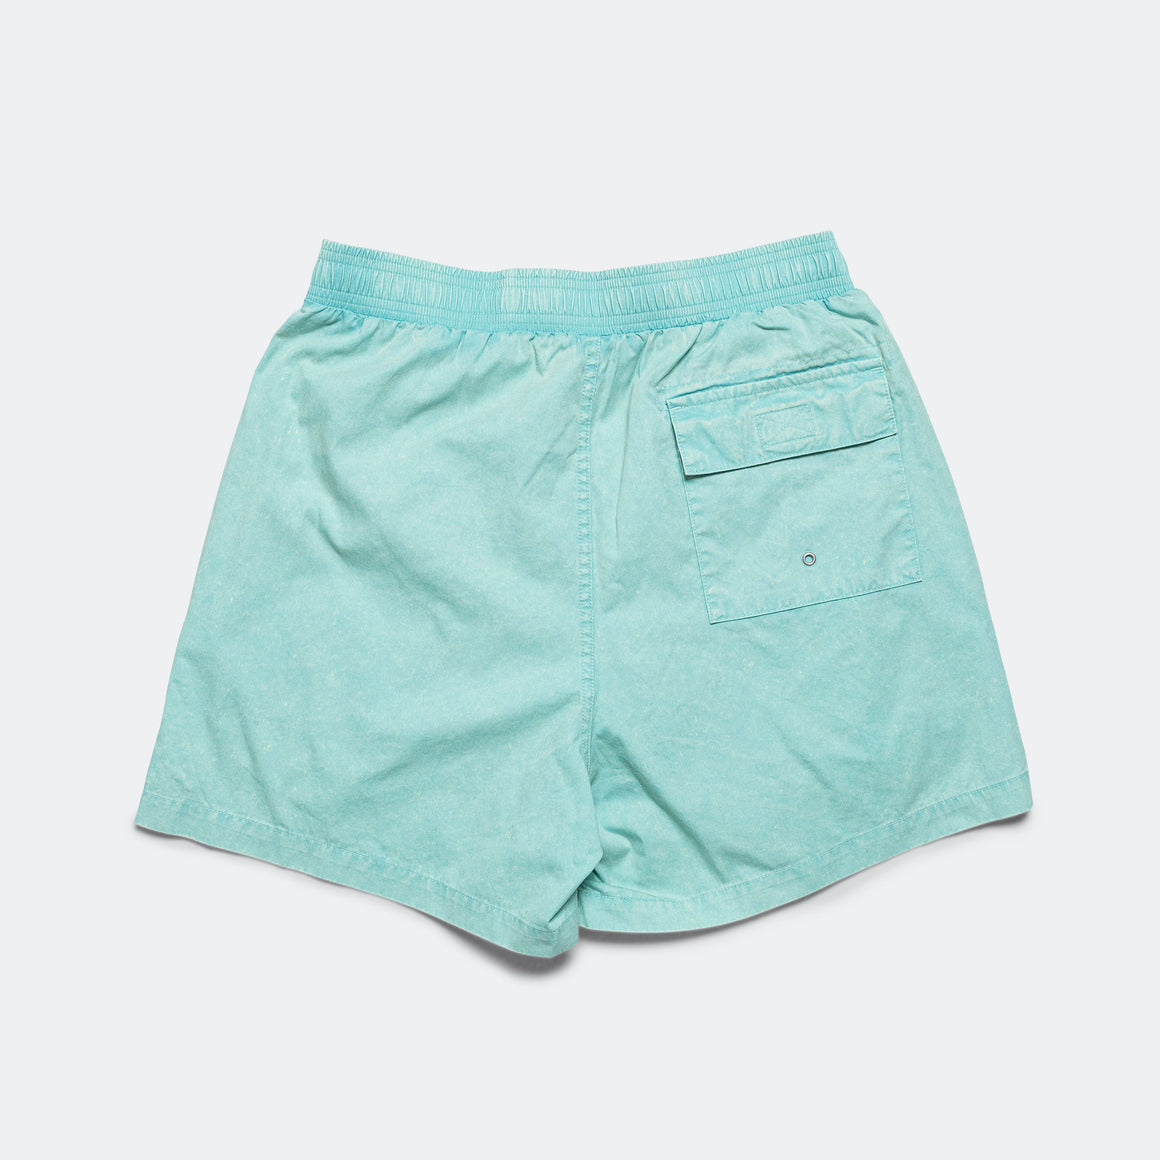 Patta - Acid Wash Shorts - Blue Radiance - UP THERE